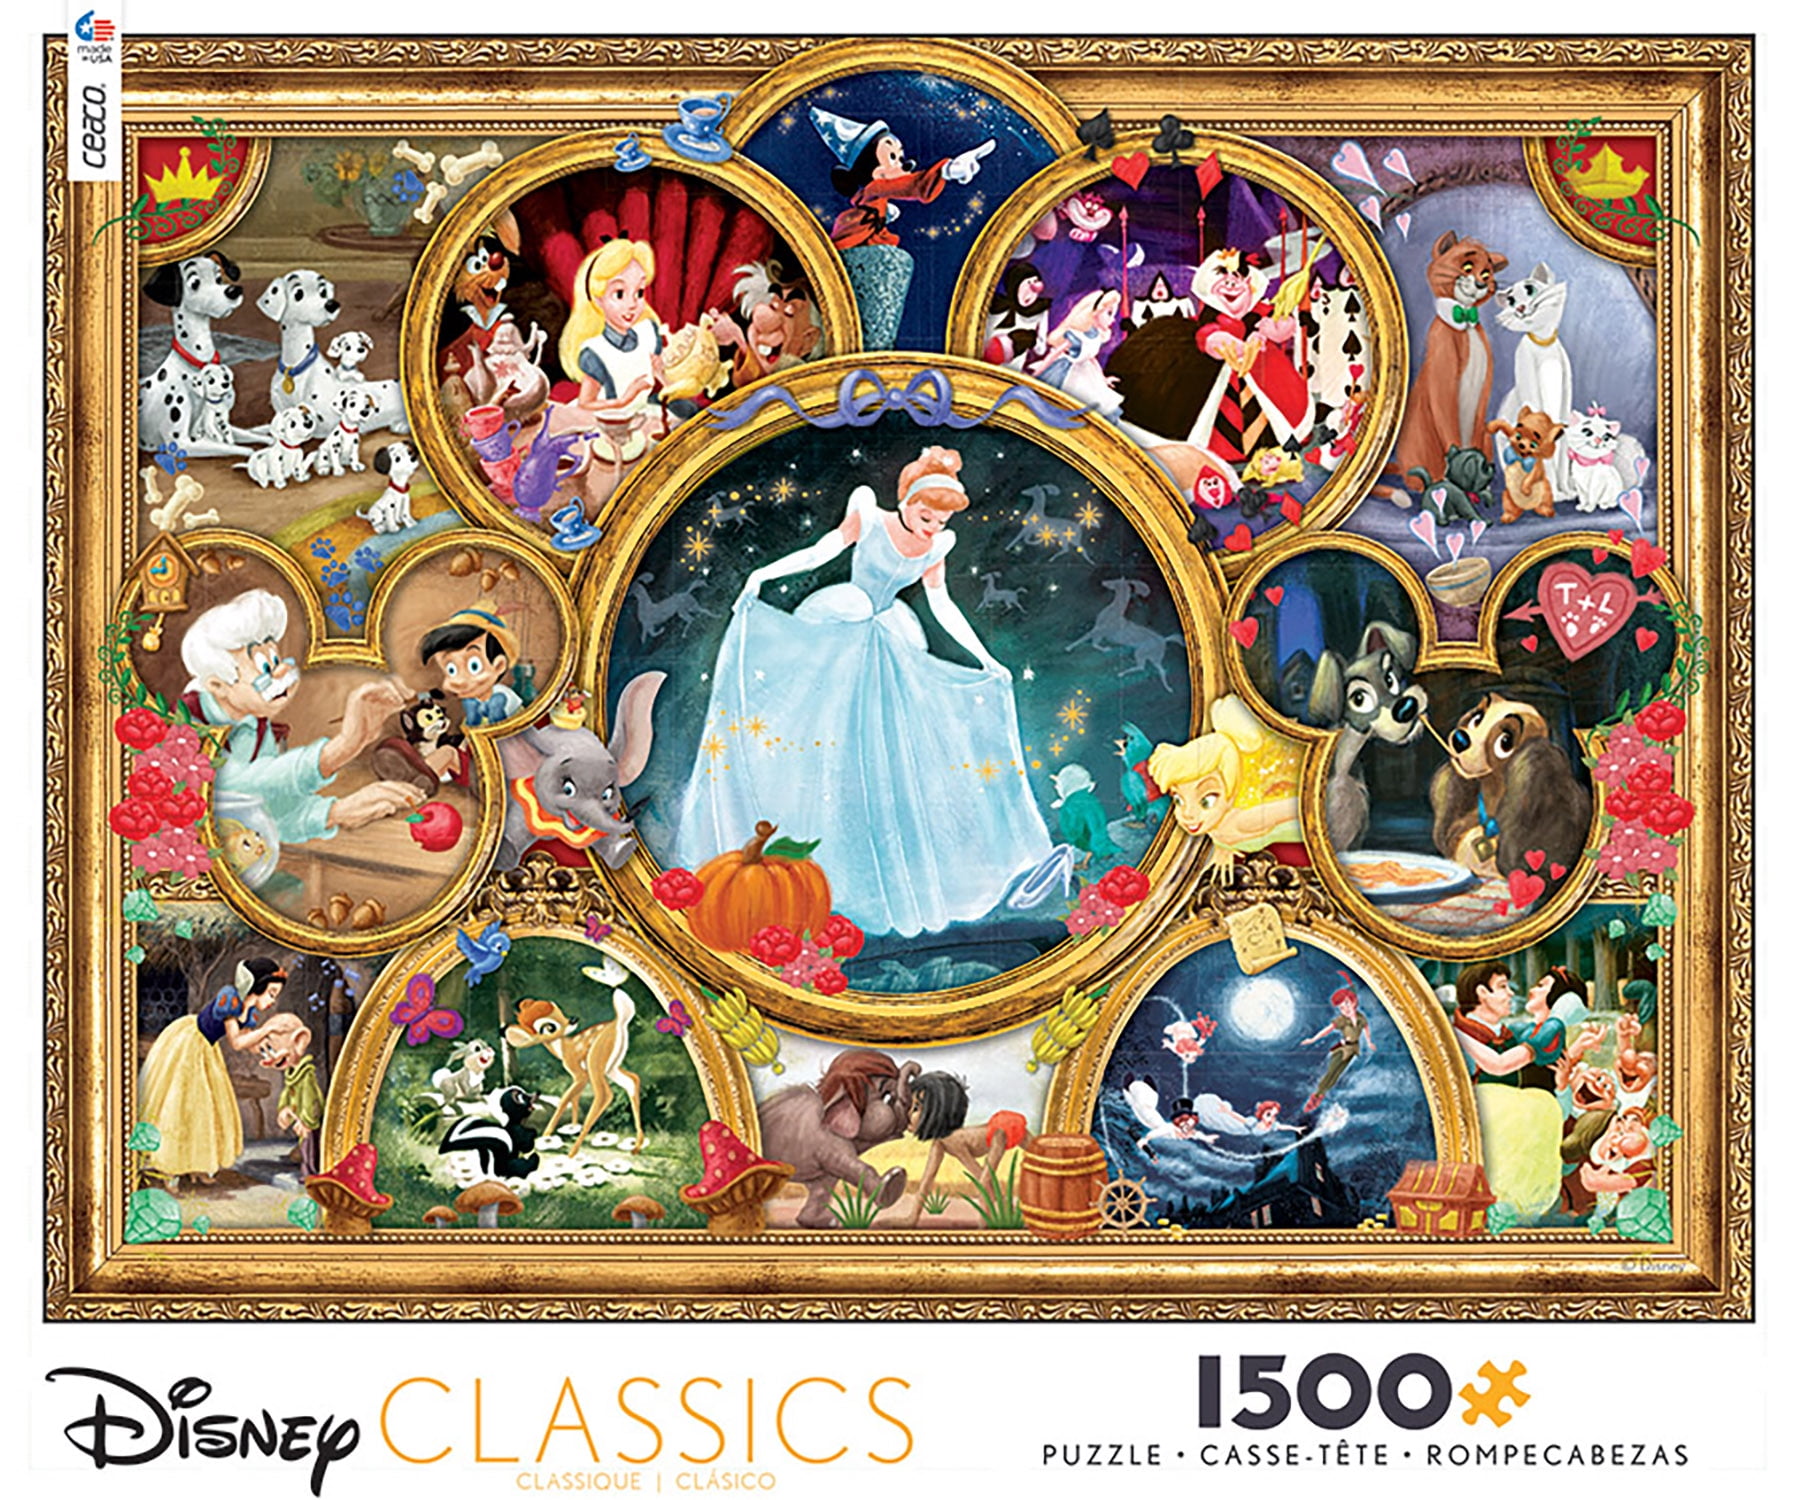 NEW SEALED Disney Classics II Stained Glass Ceaco 1500 Piece Puzzle 